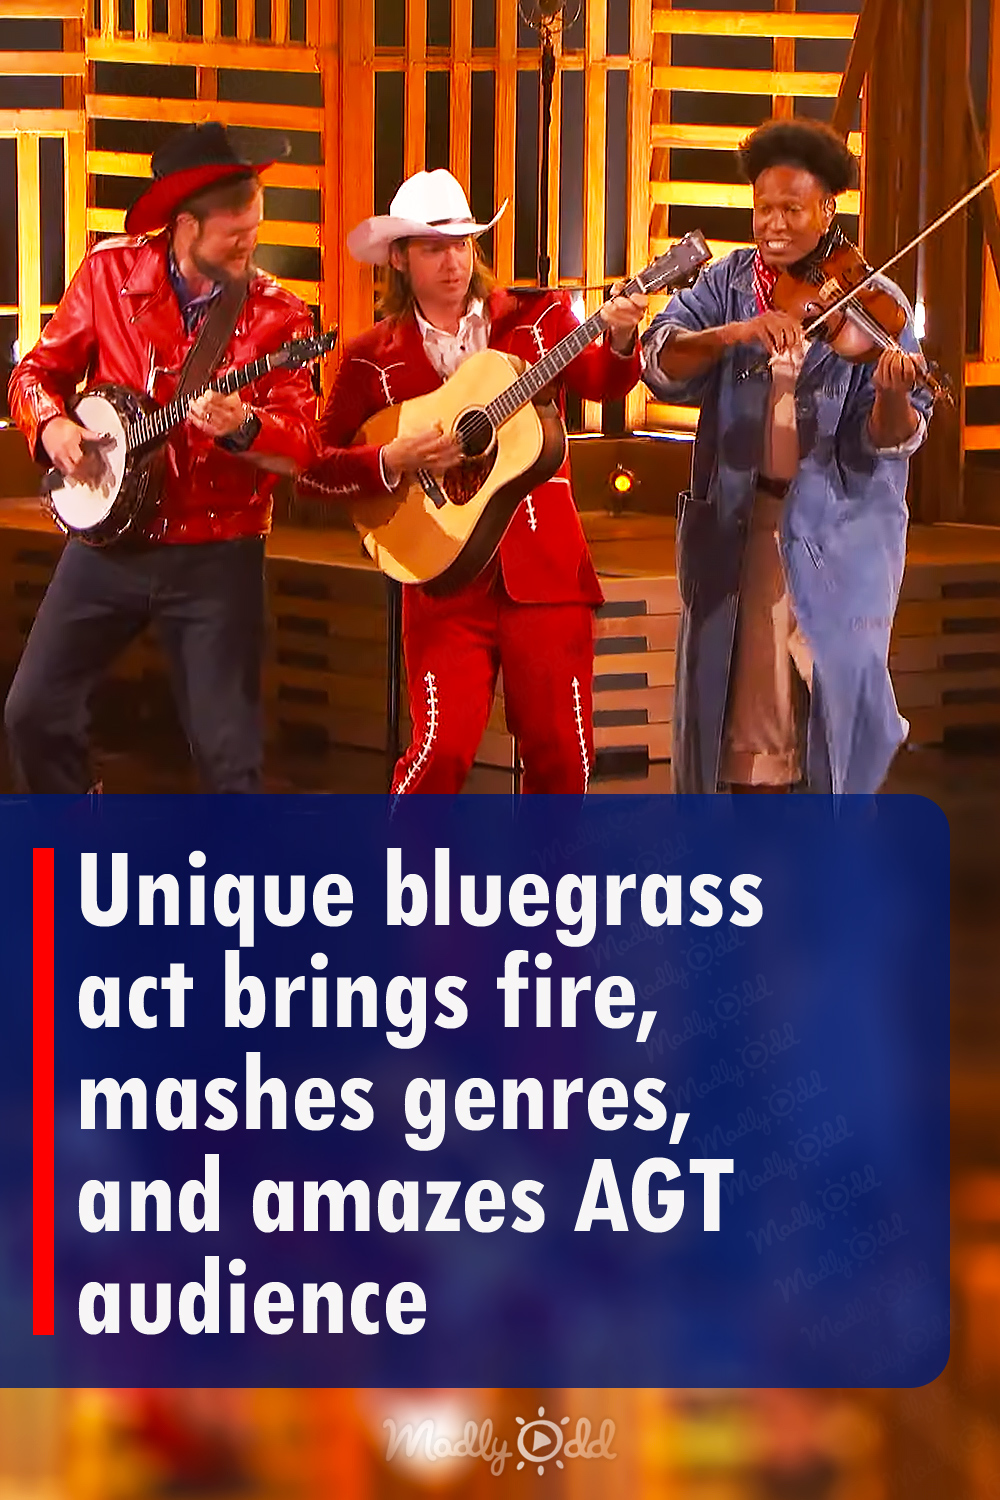 Unique bluegrass act brings fire, mashes genres, and amazes AGT audience